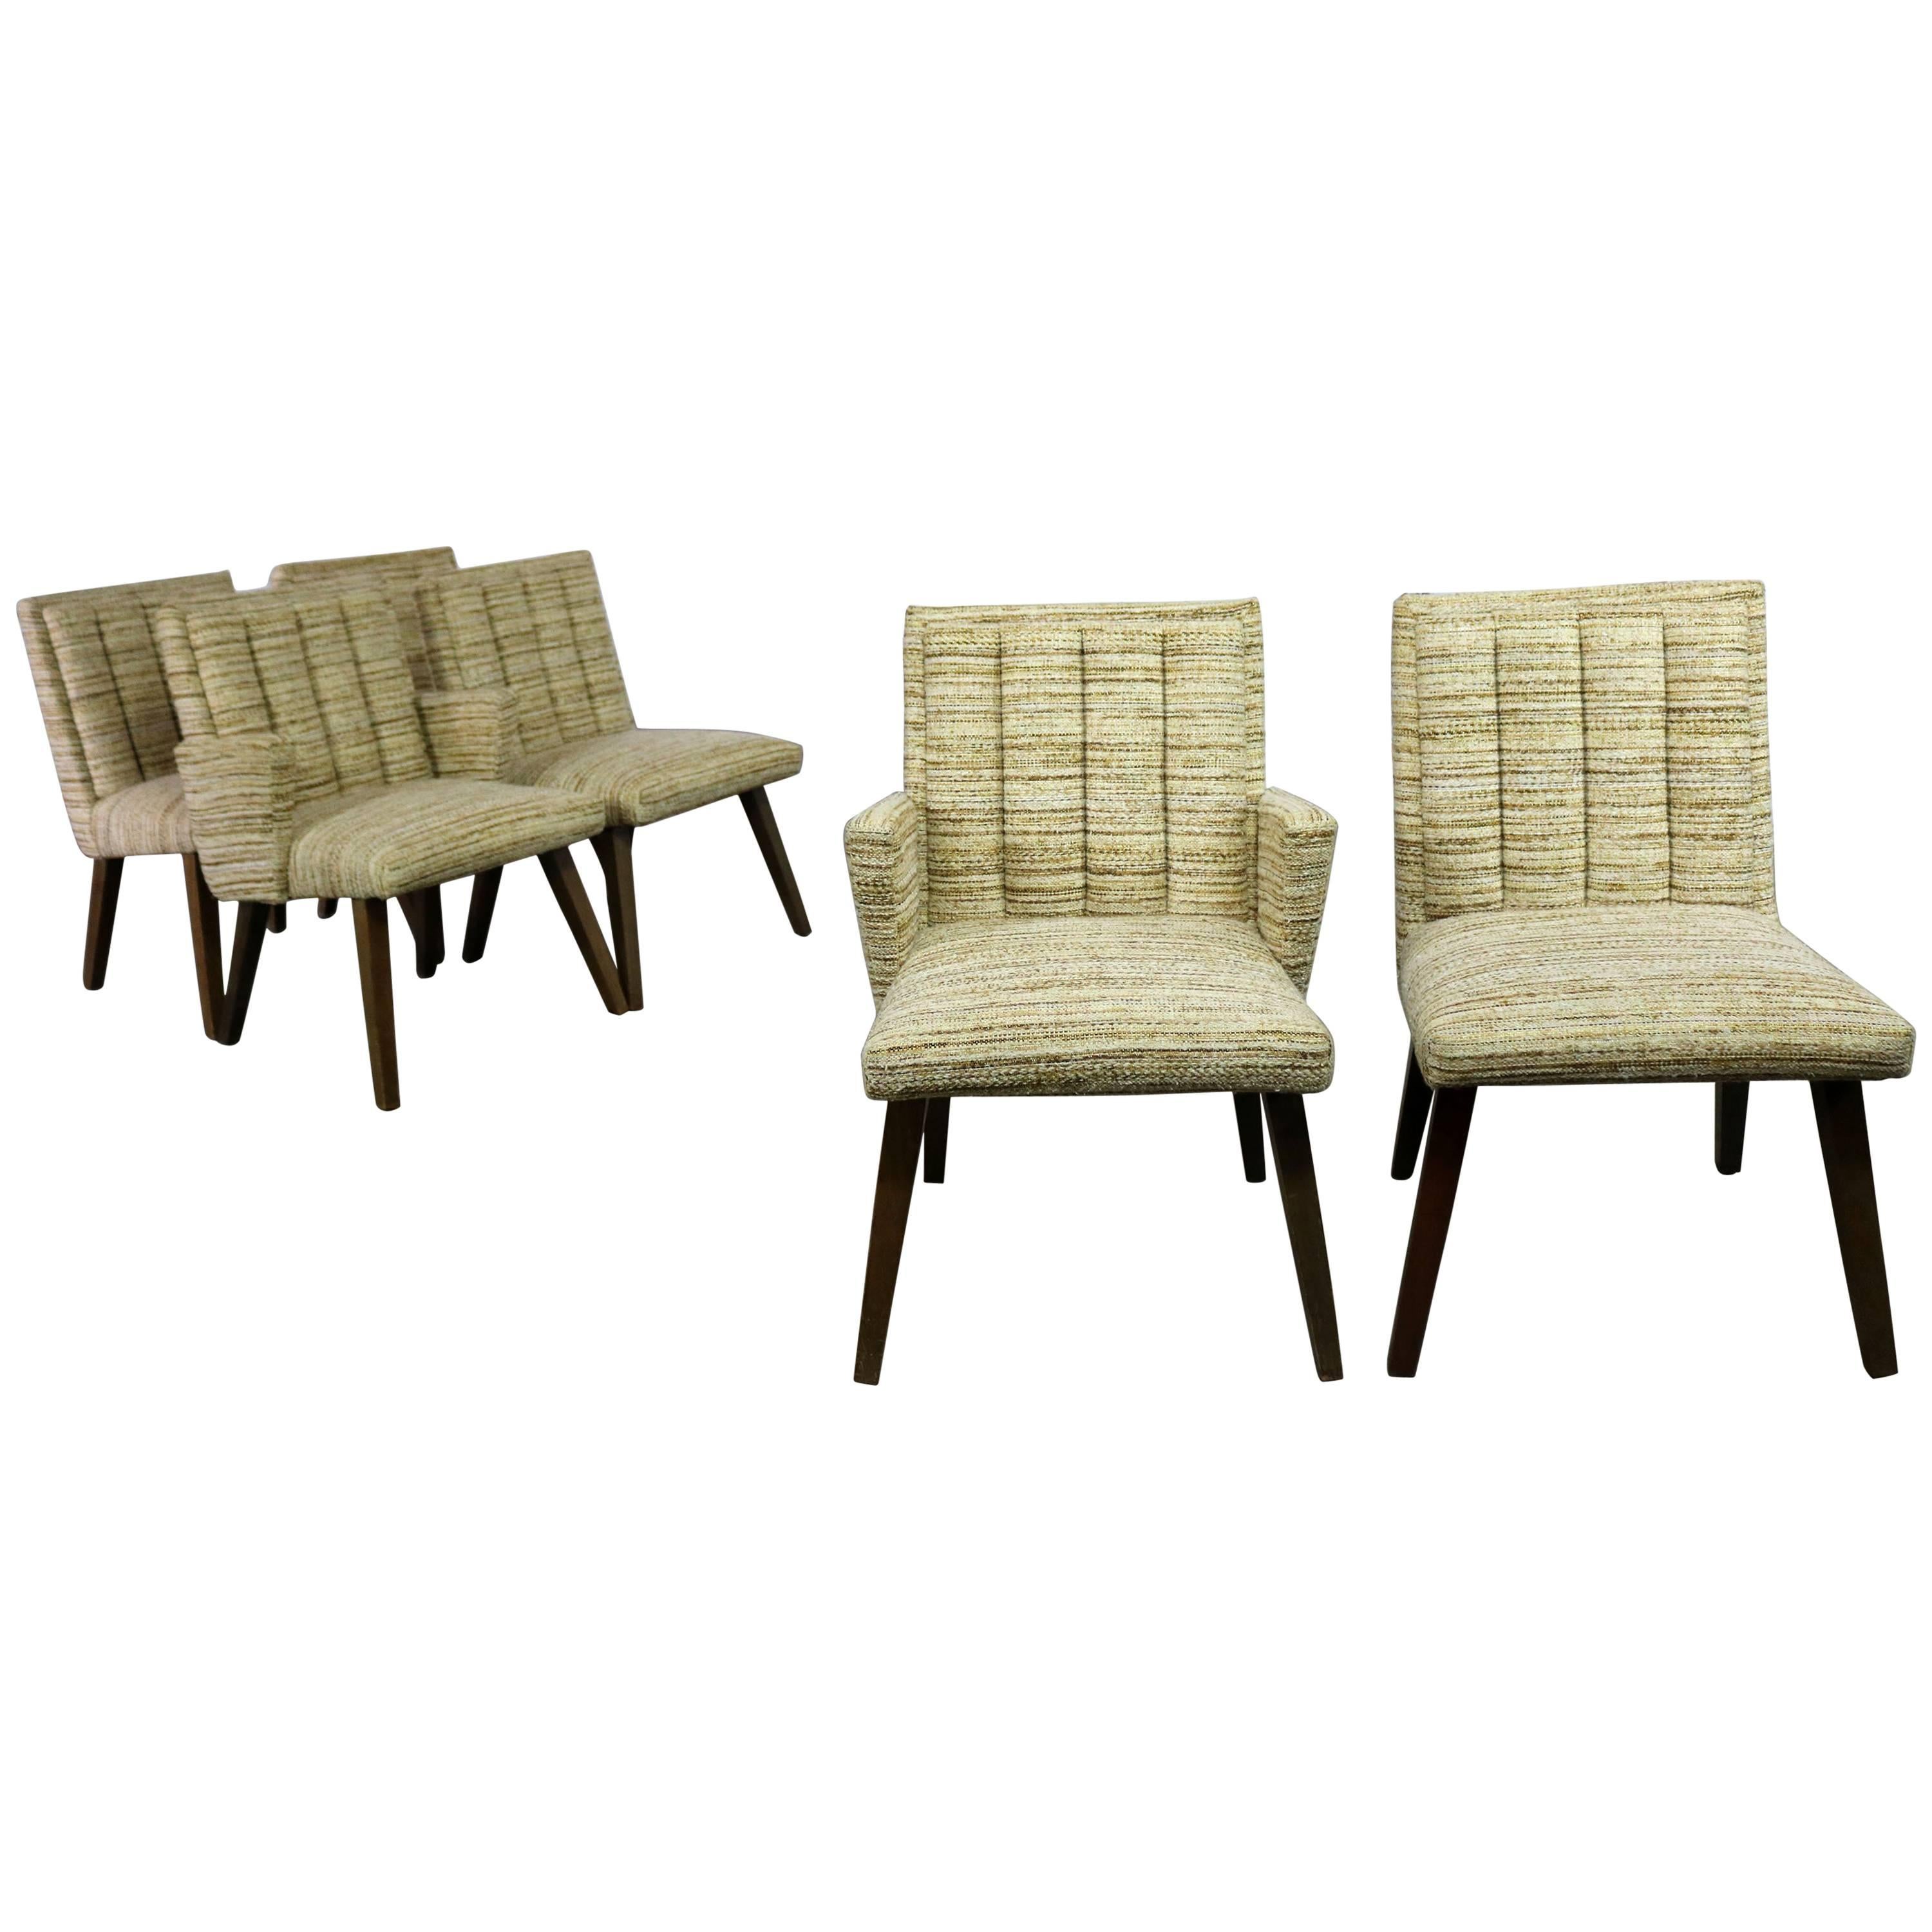 Architectural Modern Dining Chairs by Morris of California Mid-Century Modern